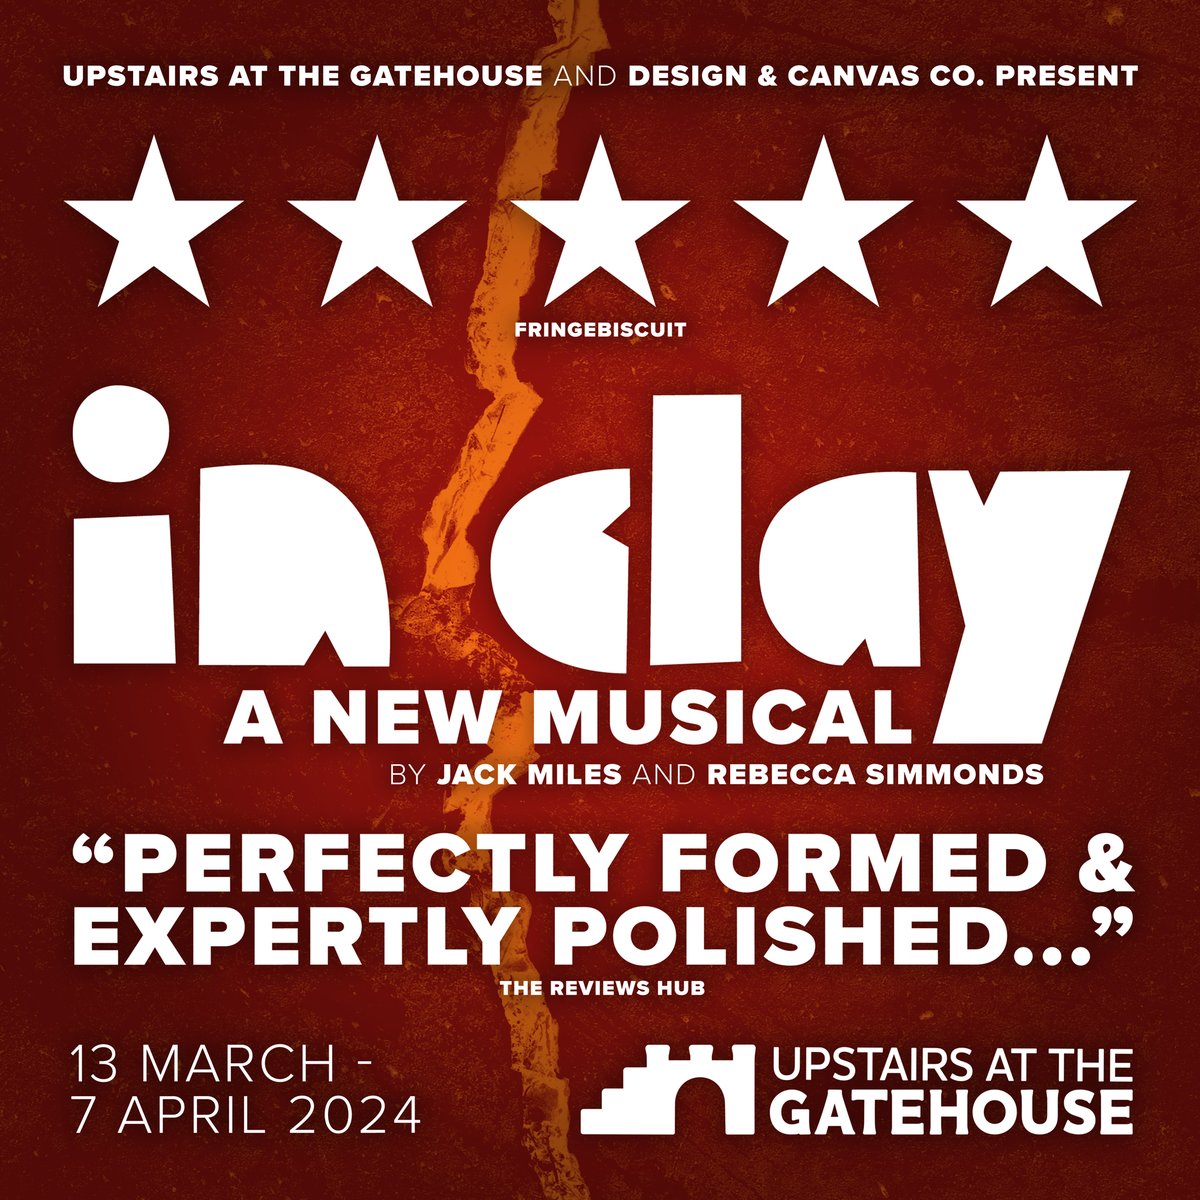 What a night! @InClayMusical at @TheOtherPalace was a triumph. We're thrilled to be bringing this exciting new musical to Upstairs at the Gatehouse in 2024. Tickets are on sale NOW! Be sure to secure yours early--you won't want to miss this. 🎟 bit.ly/inclayshow